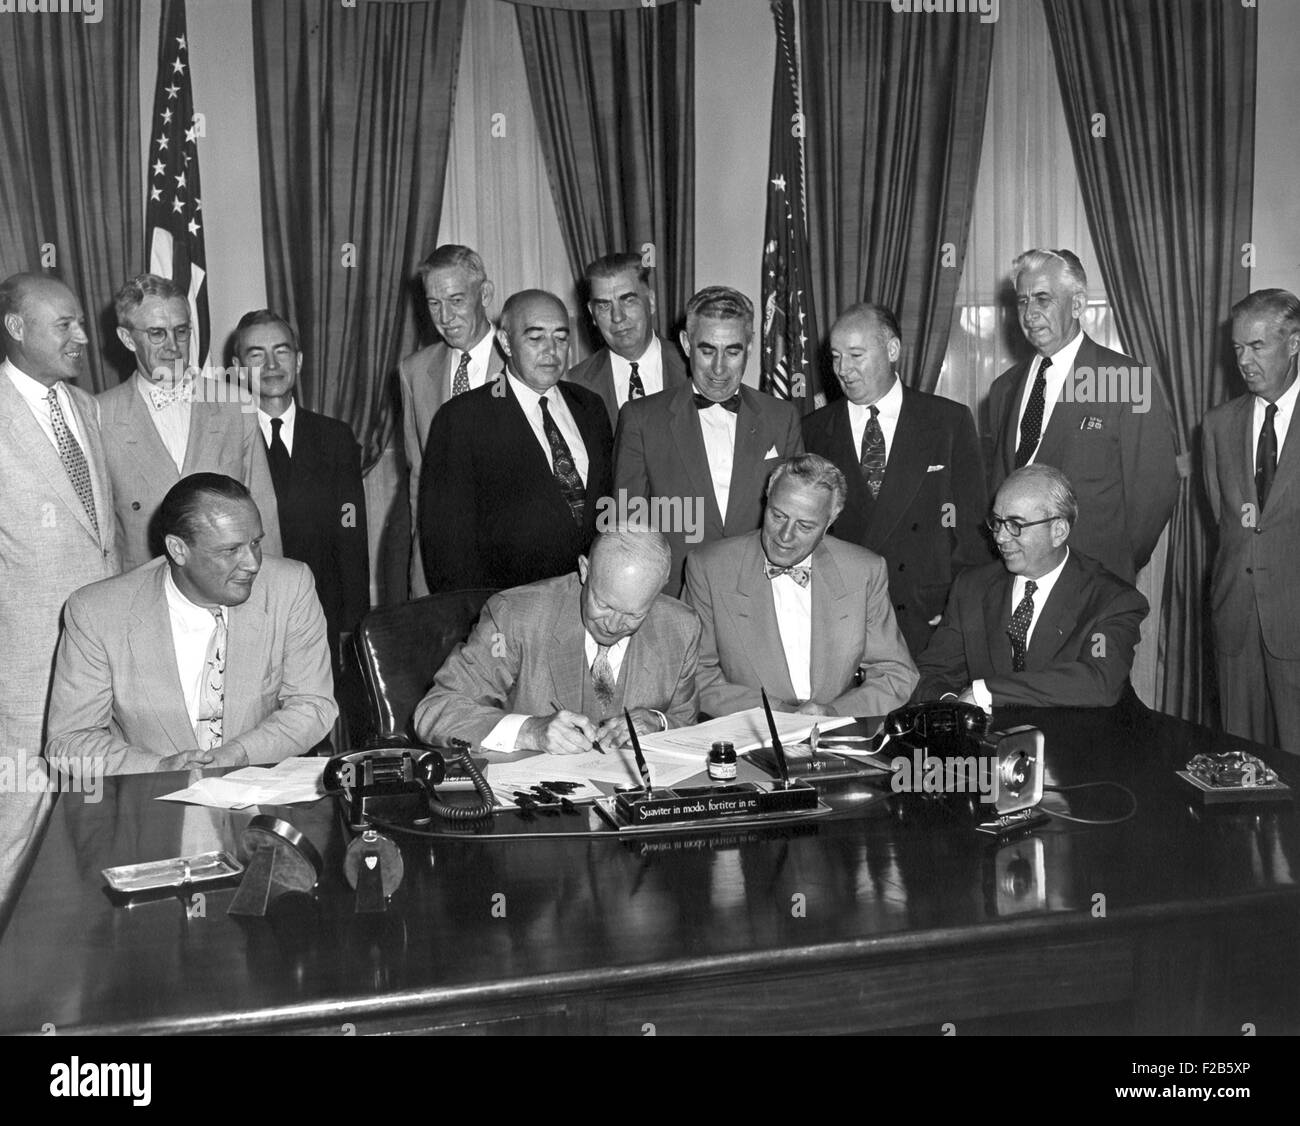 President Eisenhower signs the Atomic Energy Act of 1954. Aug. 8, 1954. Standing behind Eisenhower is Henry DeWolf Smyth (bowtie), a key physicist in the development of nuclear energy. Seated far right is Lewis Strauss, Chairman, Atomic Energy Commission. - (BSLOC 2014 16 234) Stock Photo